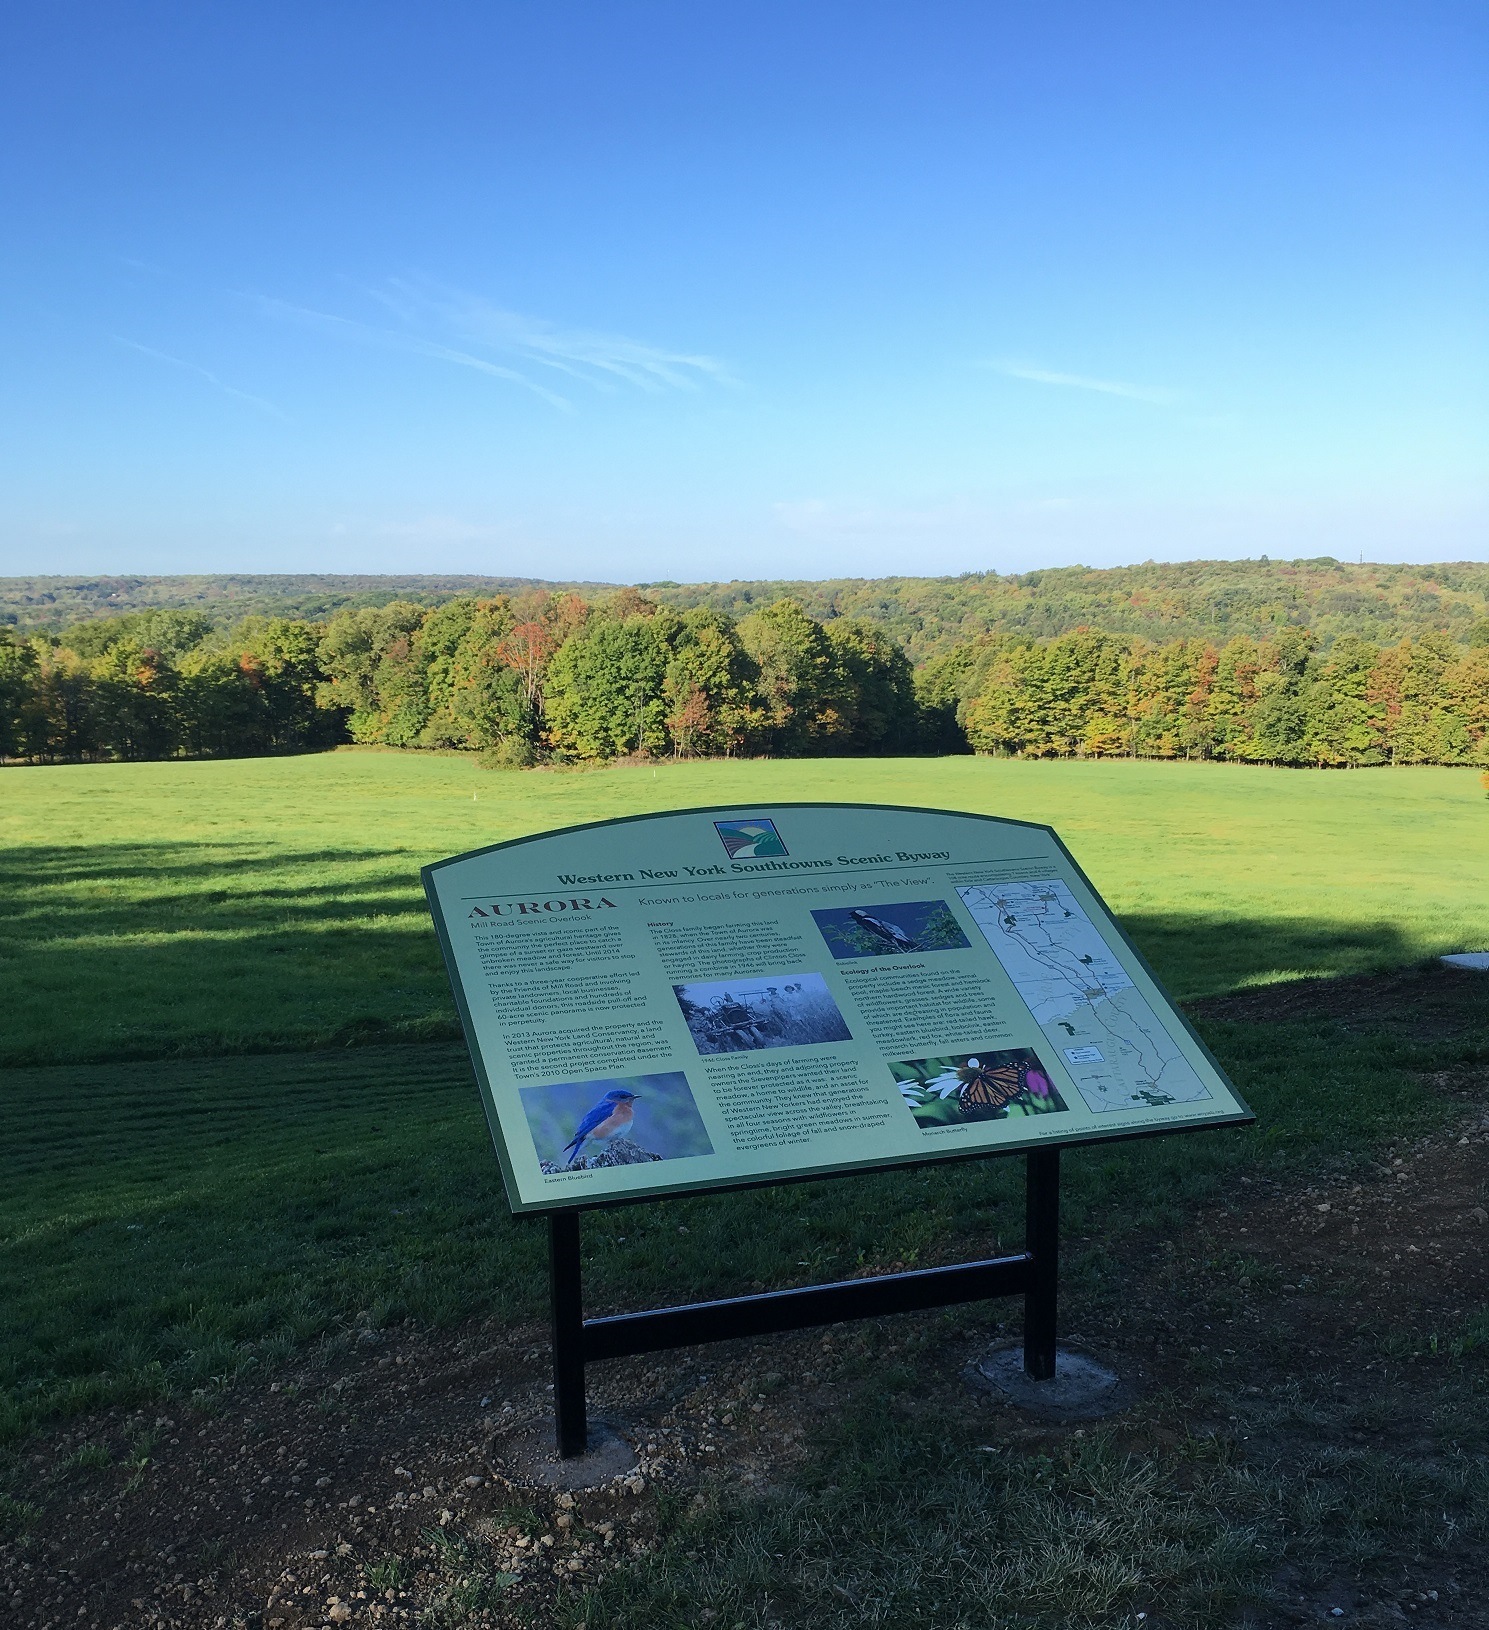 Improvements underway at the Mill Road Scenic Overlook